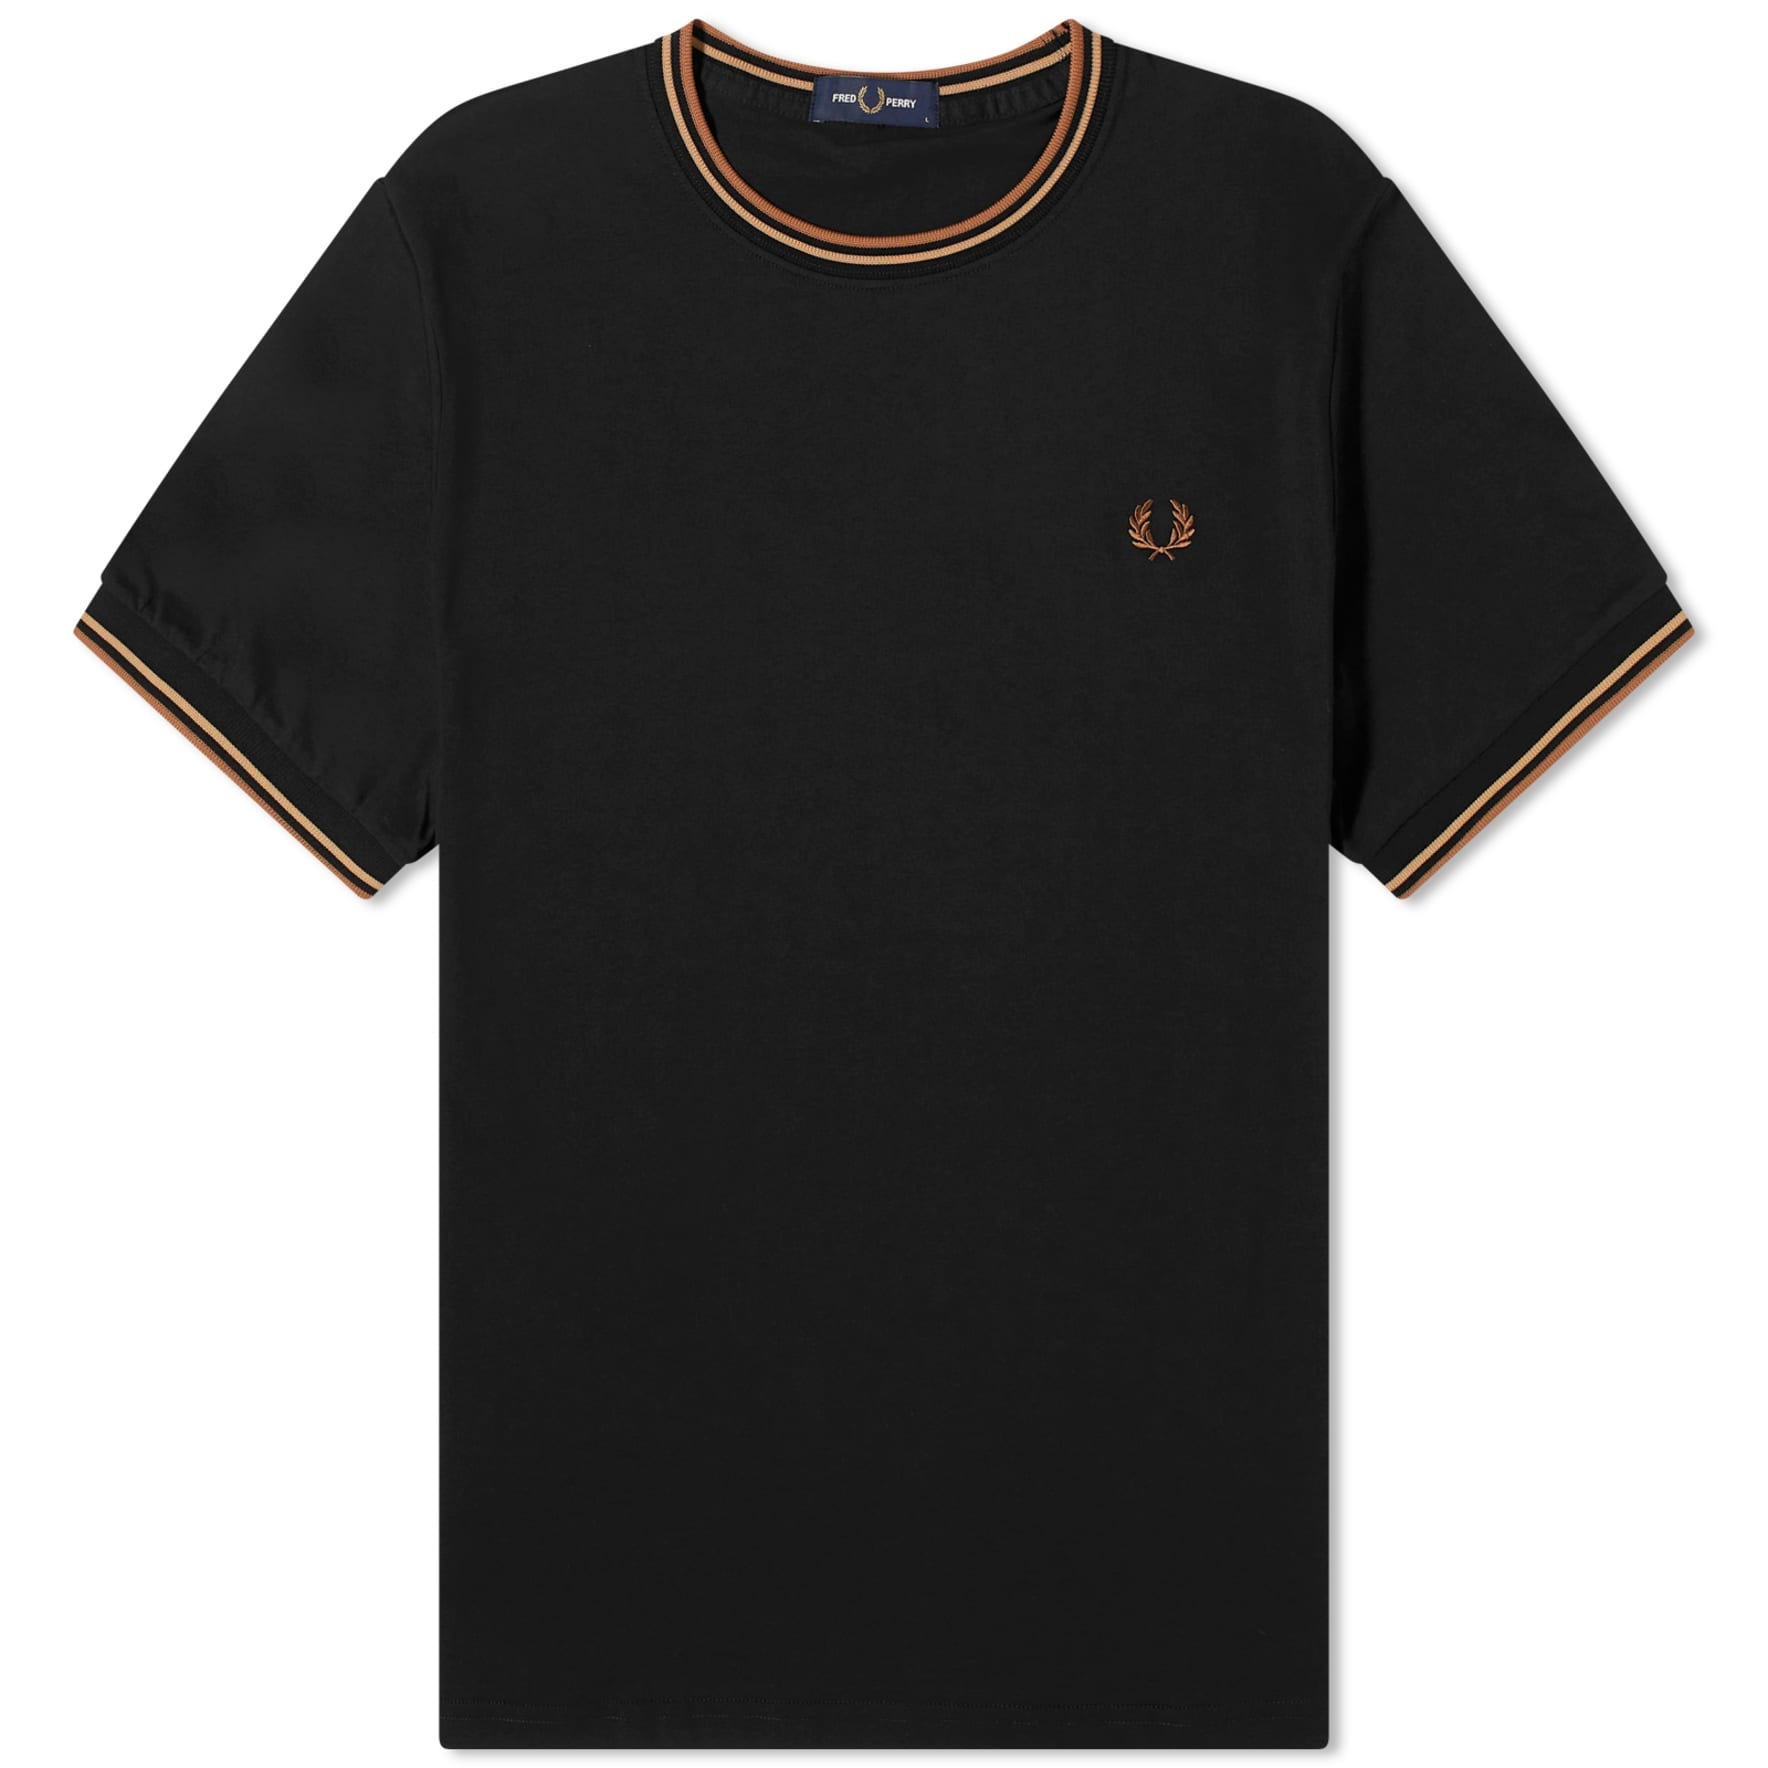 Футболка Fred Perry Twin Tipped, черный футболка поло fred perry twin tipped кремовый